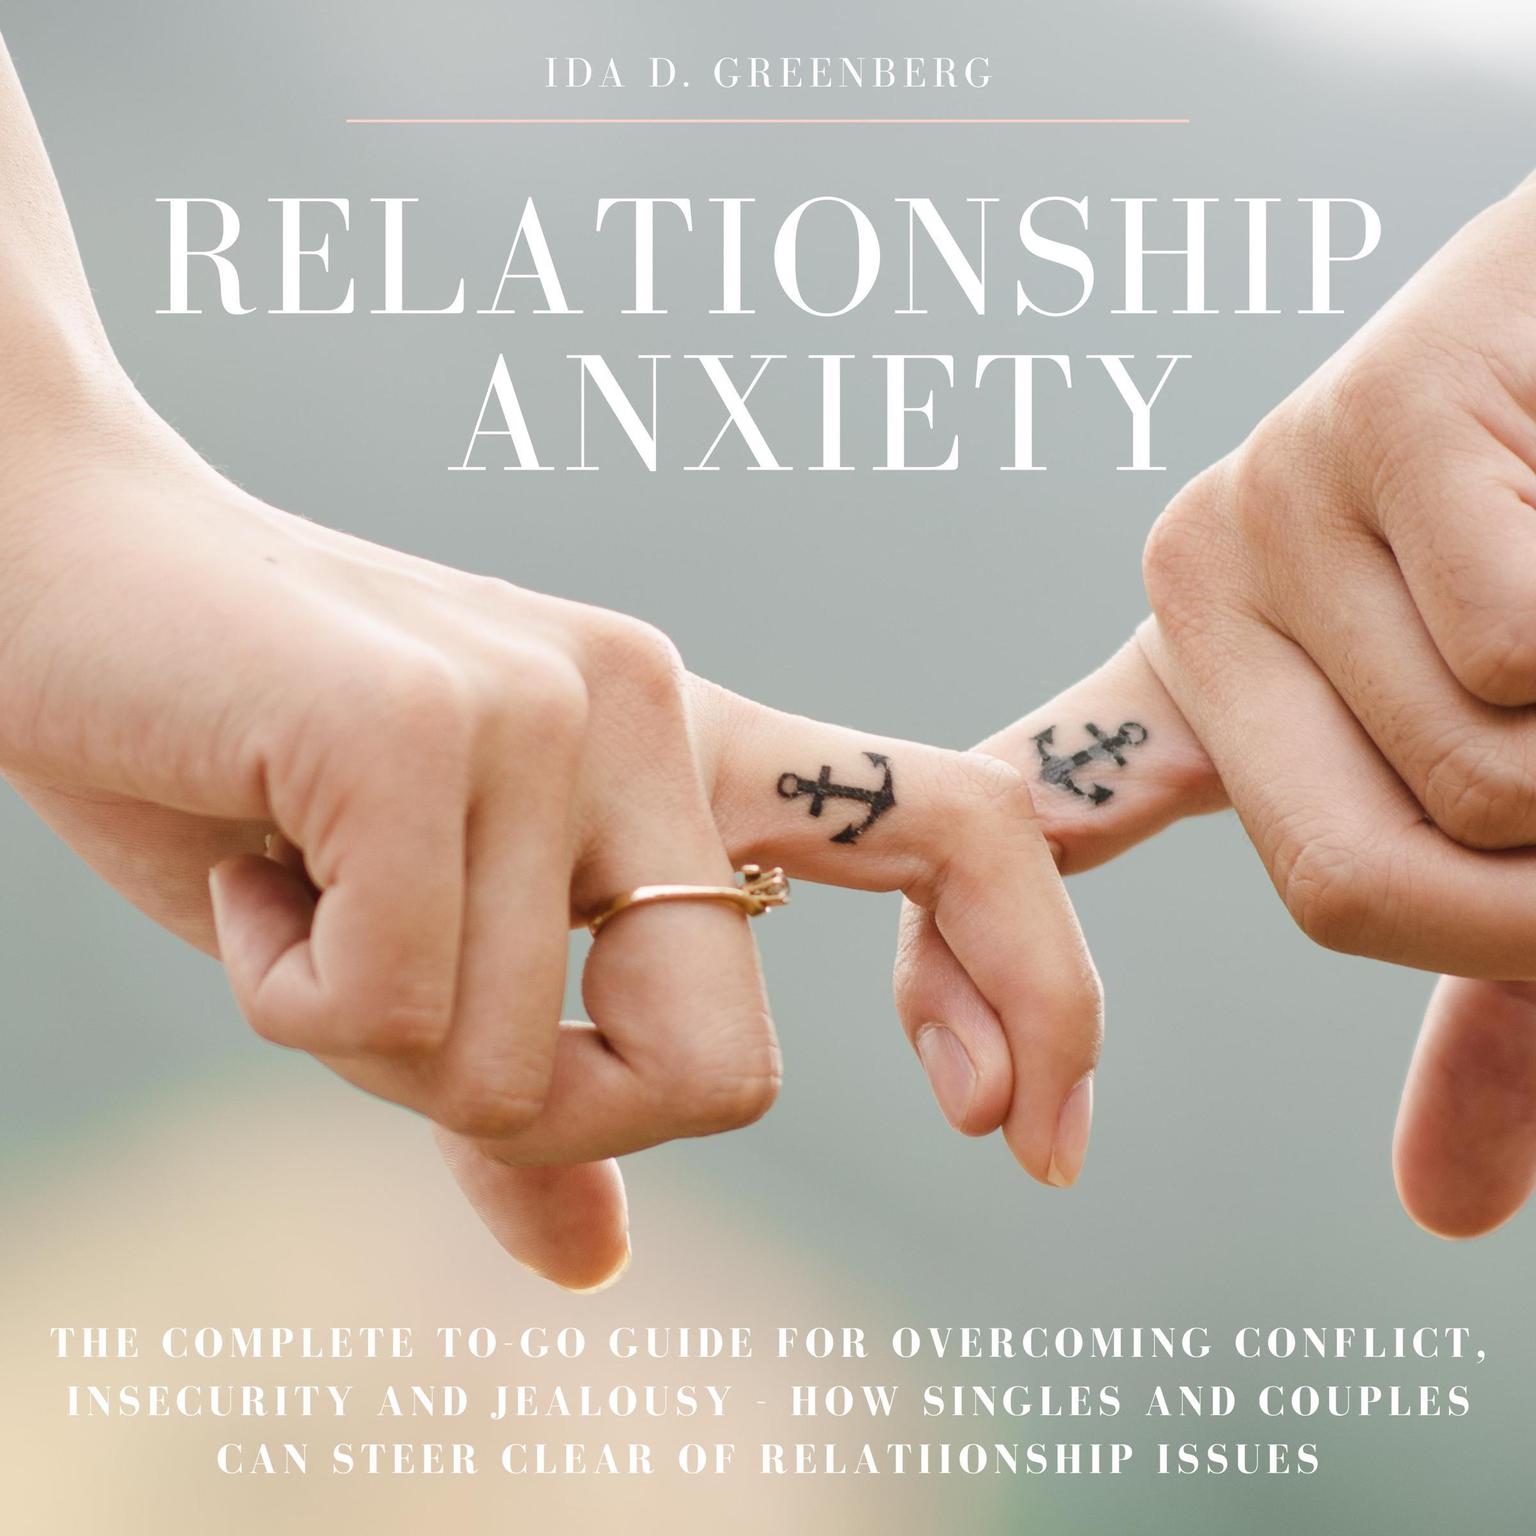 Relationship Anxiety: The Complete Go-To Guide for overcoming Conflict, Insecurity and Jealousy - How Singles and Couples Can Steer Clear of Relatiionship Issues Audiobook, by Ida D Greenberg